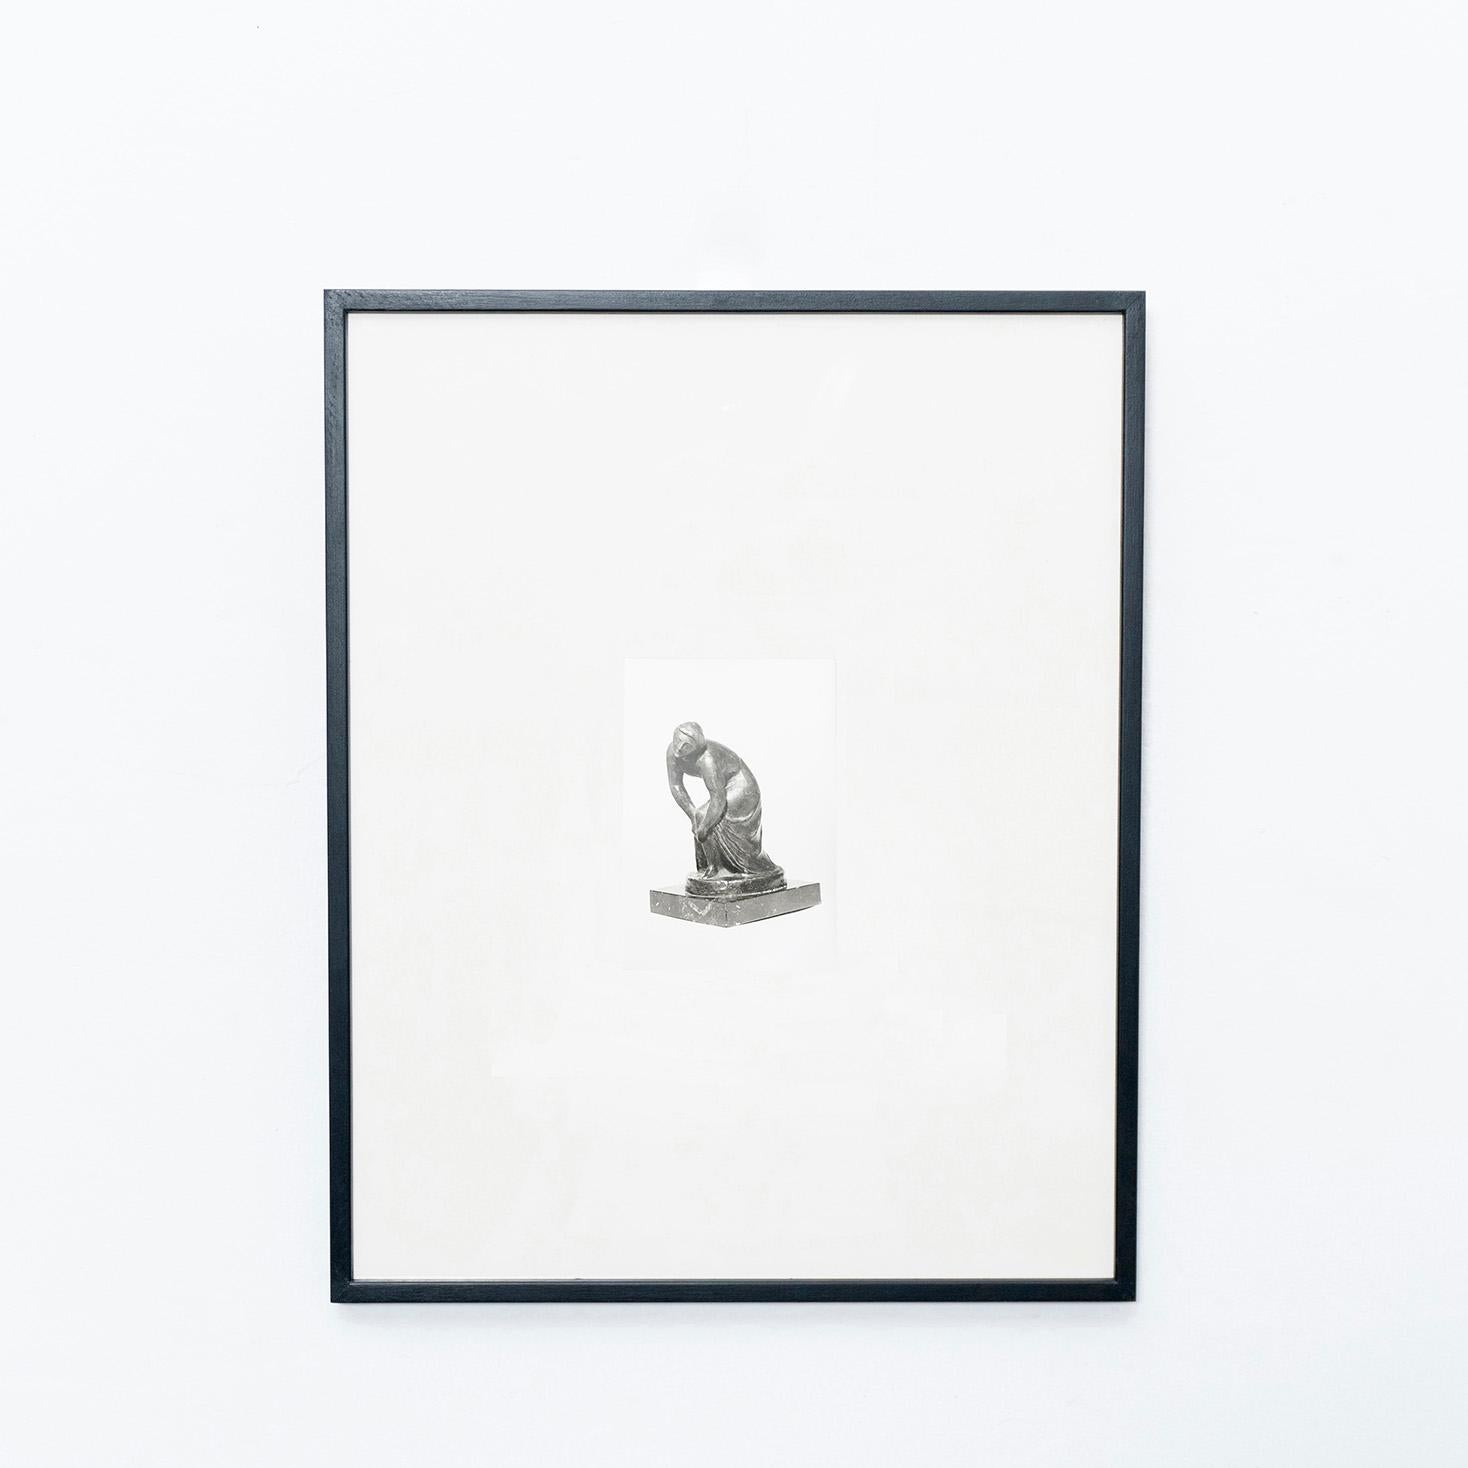 Manolo Hugué archive photography of sculpture.
Printed, circa 1960.

In original condition, with minor wear consistent with age and use, preserving a beautiful patina.

The photography comes framed. The frame on the photos is just an example,